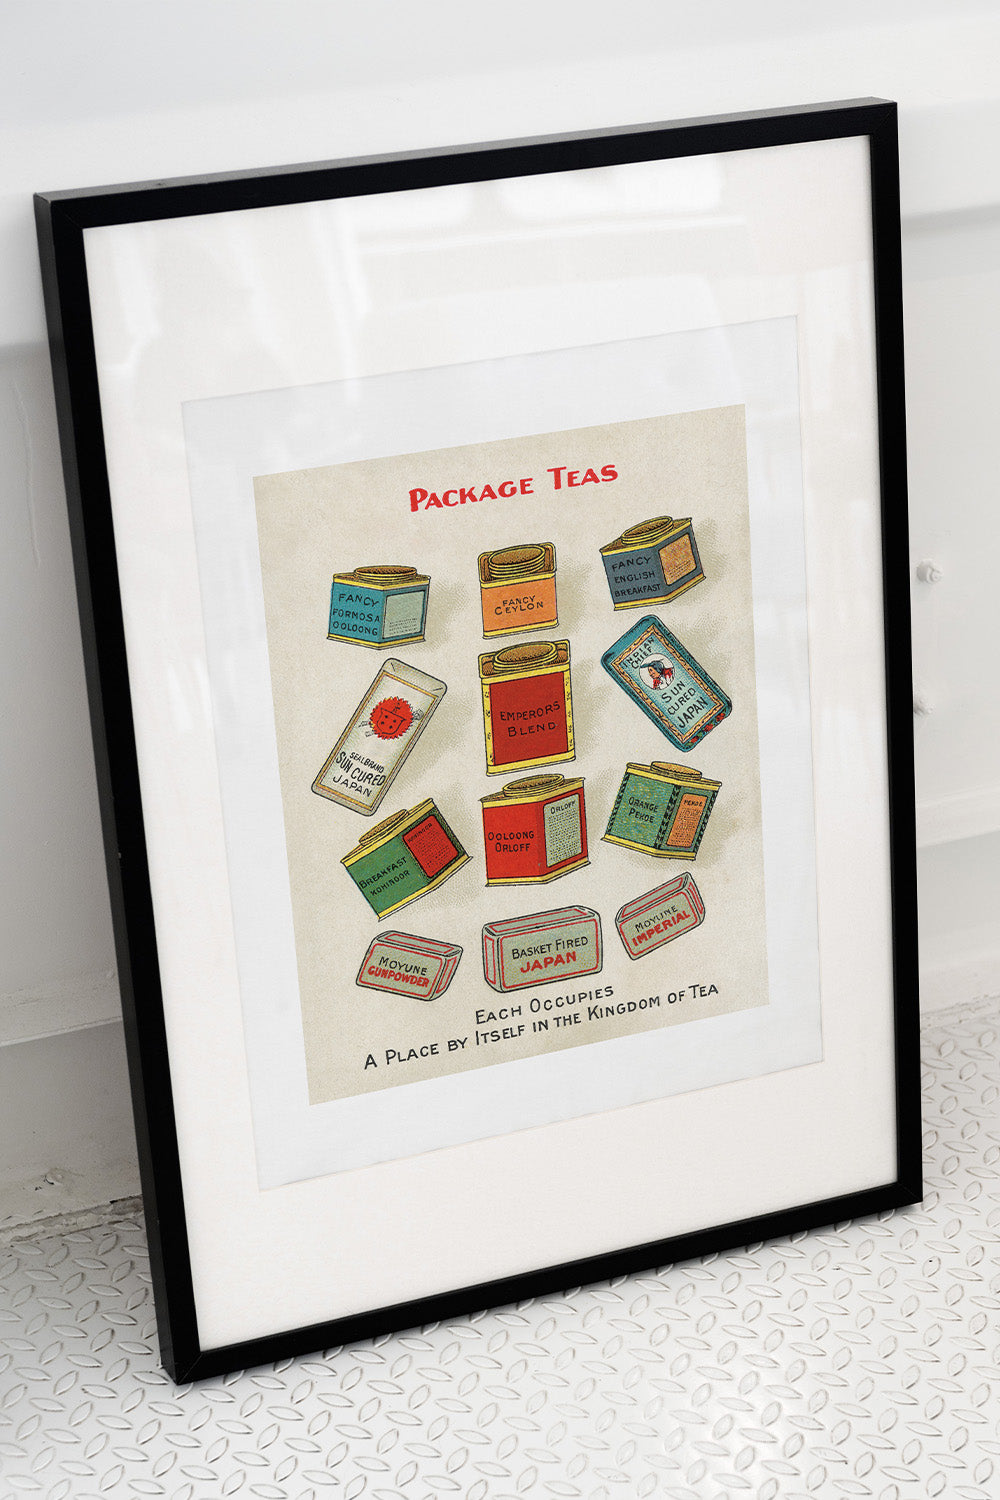 8x10 art print of a vintage Chase & Sanborn's package teas advertisement, with vivid colors and classic design.